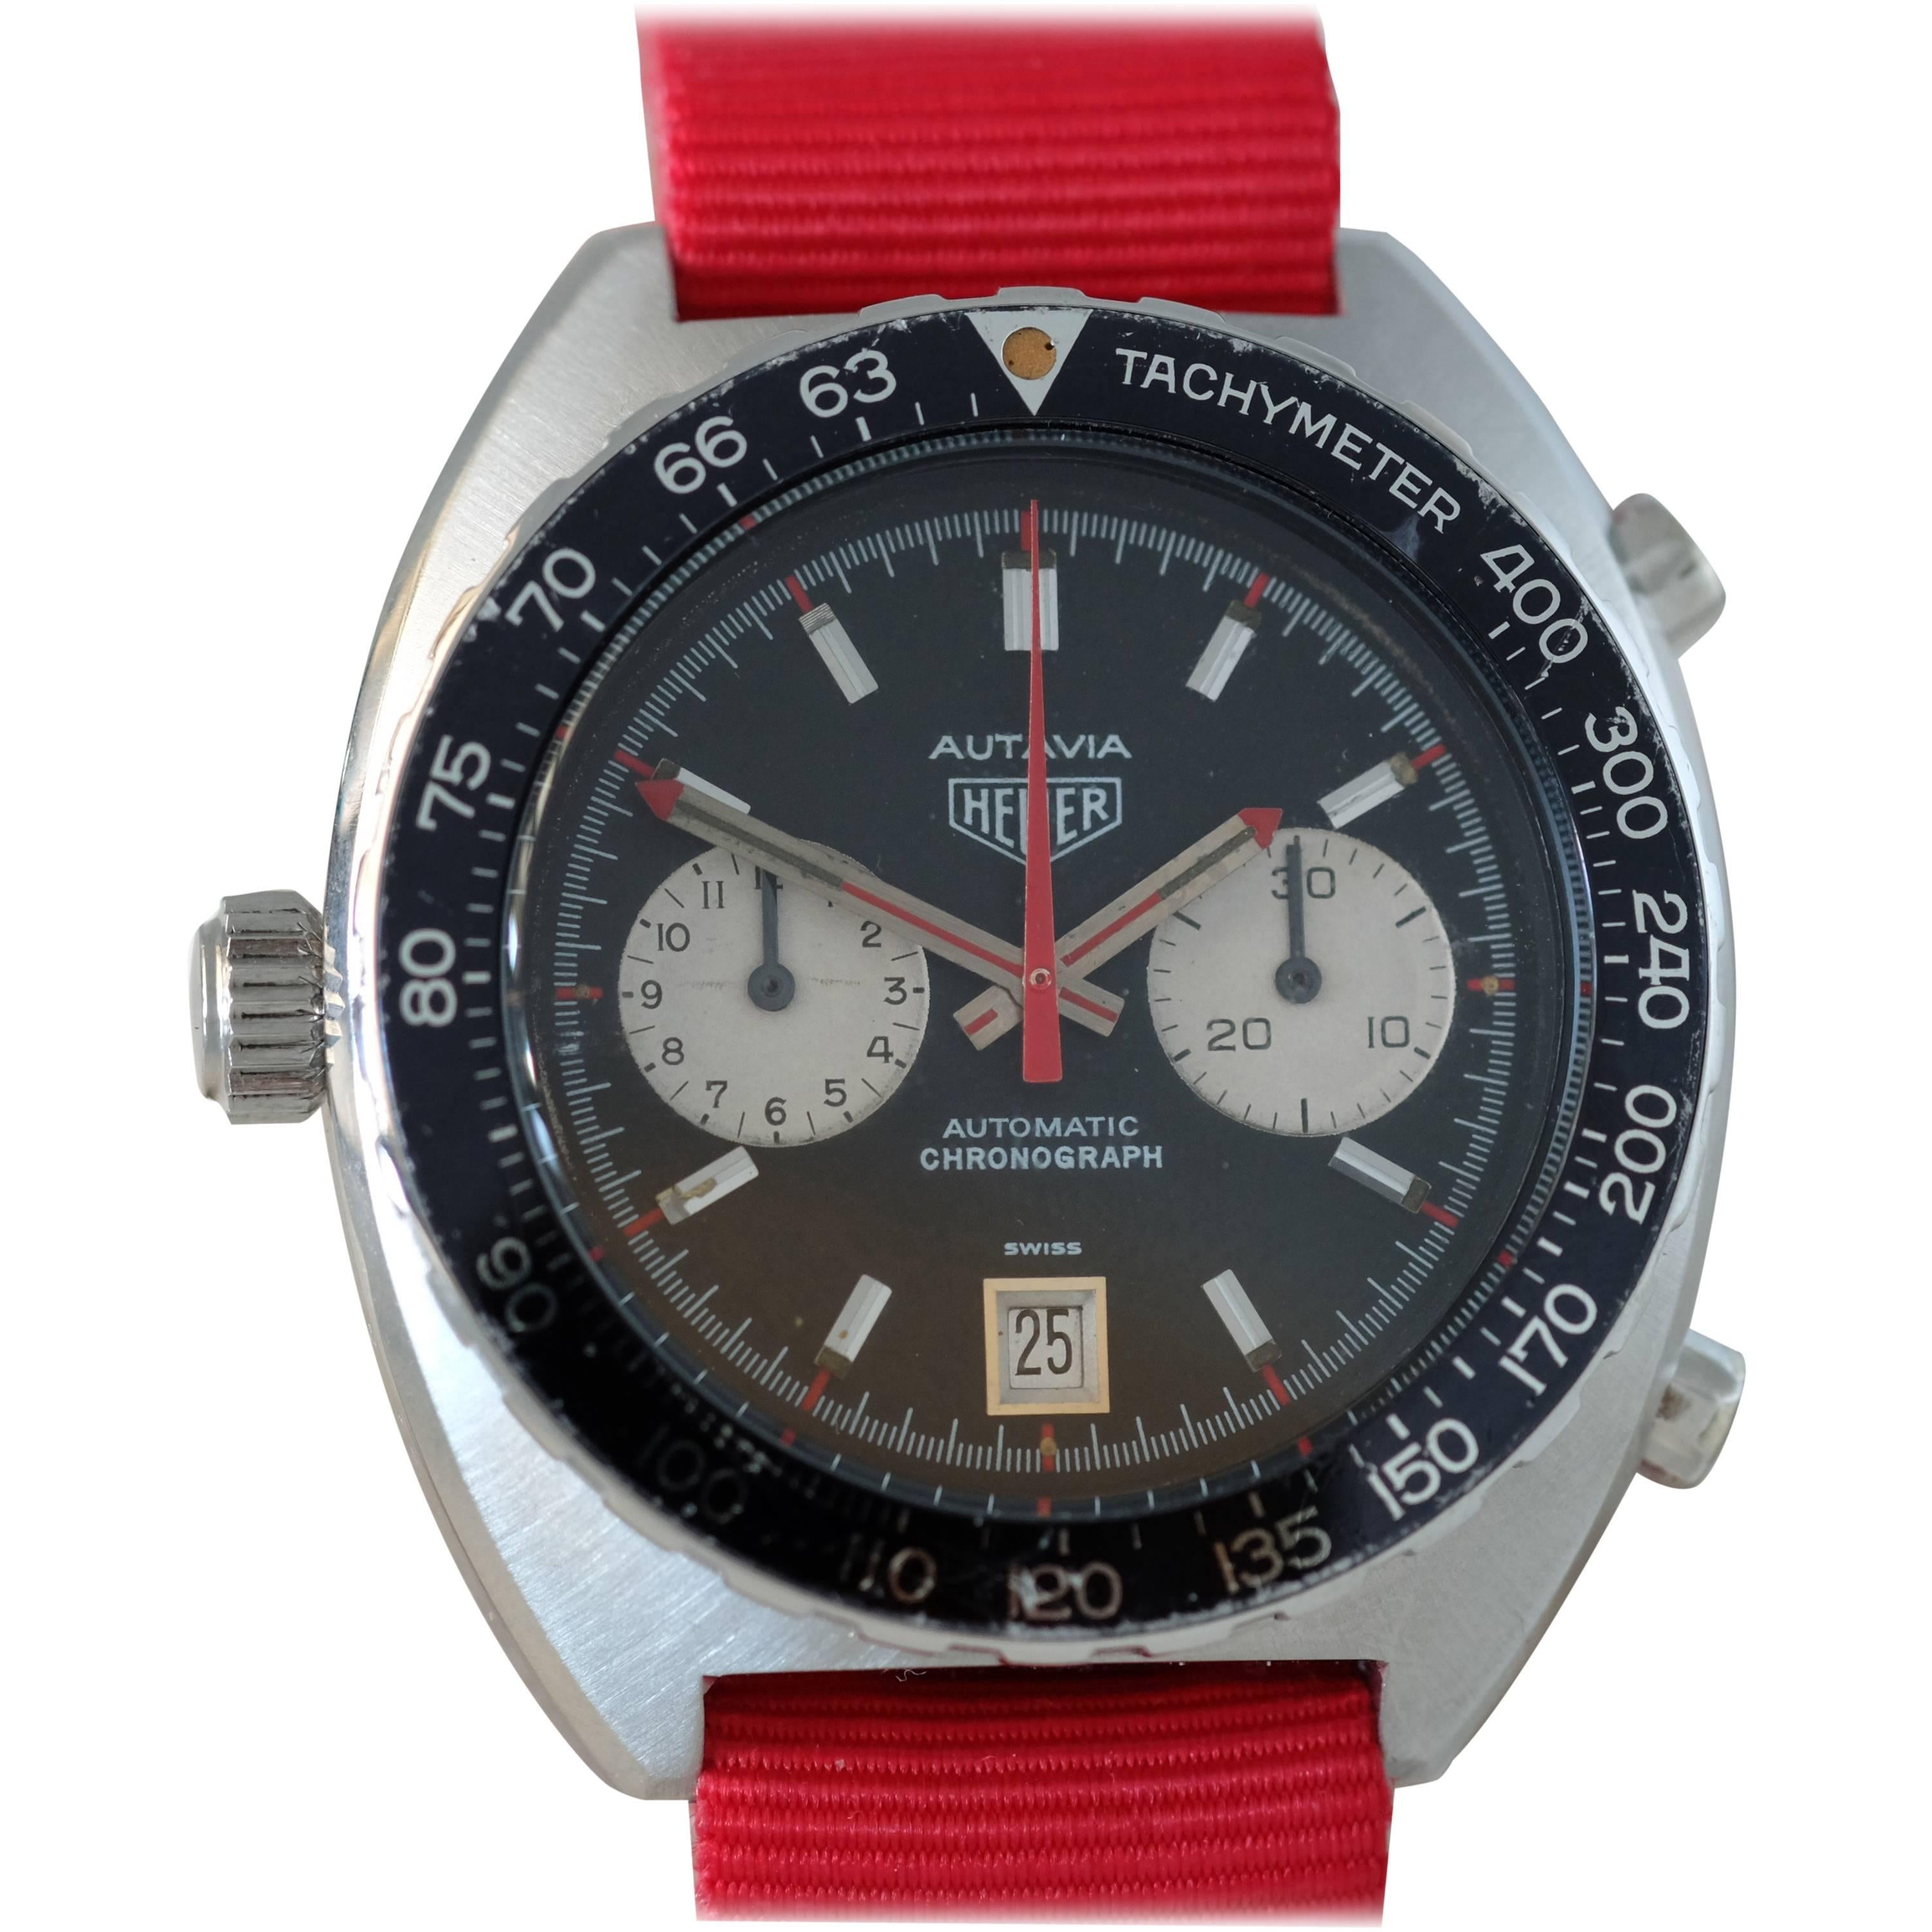 Heuer stainless steel Autavia Viceroy racer chronograph wristwatch Circa 1974 For Sale